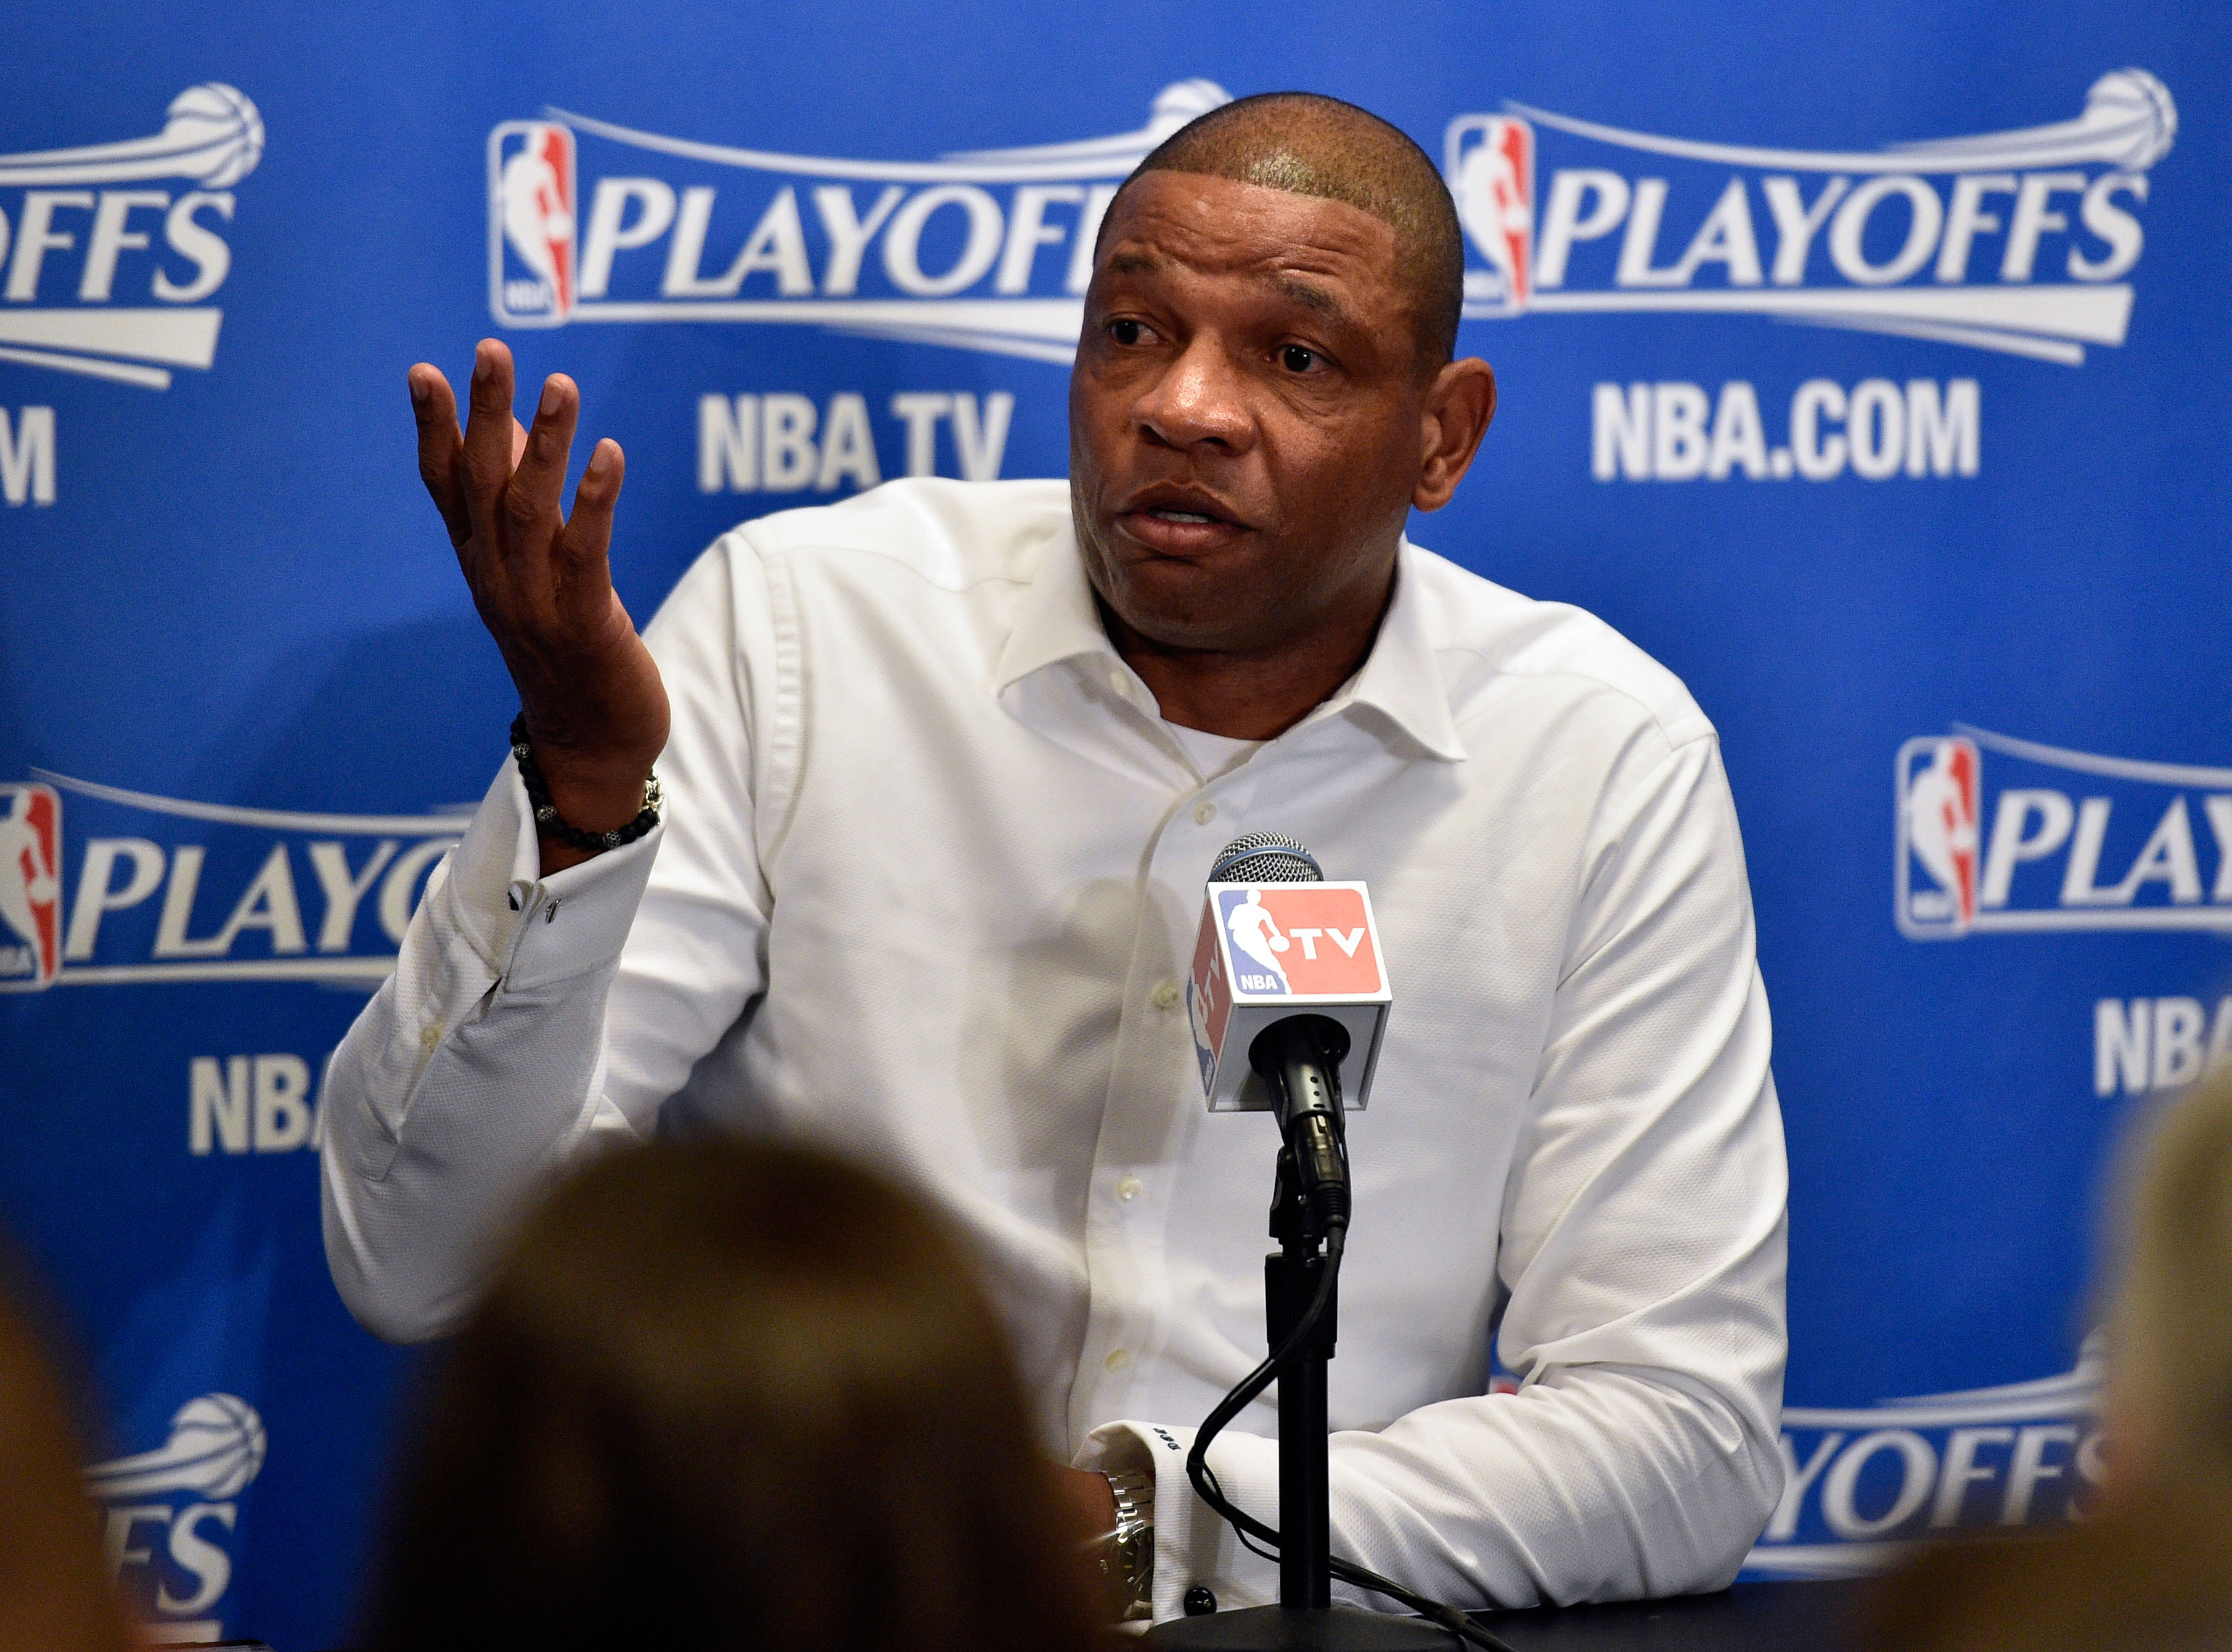 Los Angeles Clippers head coach Doc Rivers talks during a press conference prior to a game between the Golden State Warriors and Los Angeles Clippers at Staples Center, in Los Angeles, on April 29, 2014 (Kelvin Kuo—USA Today Sports/Reuters)